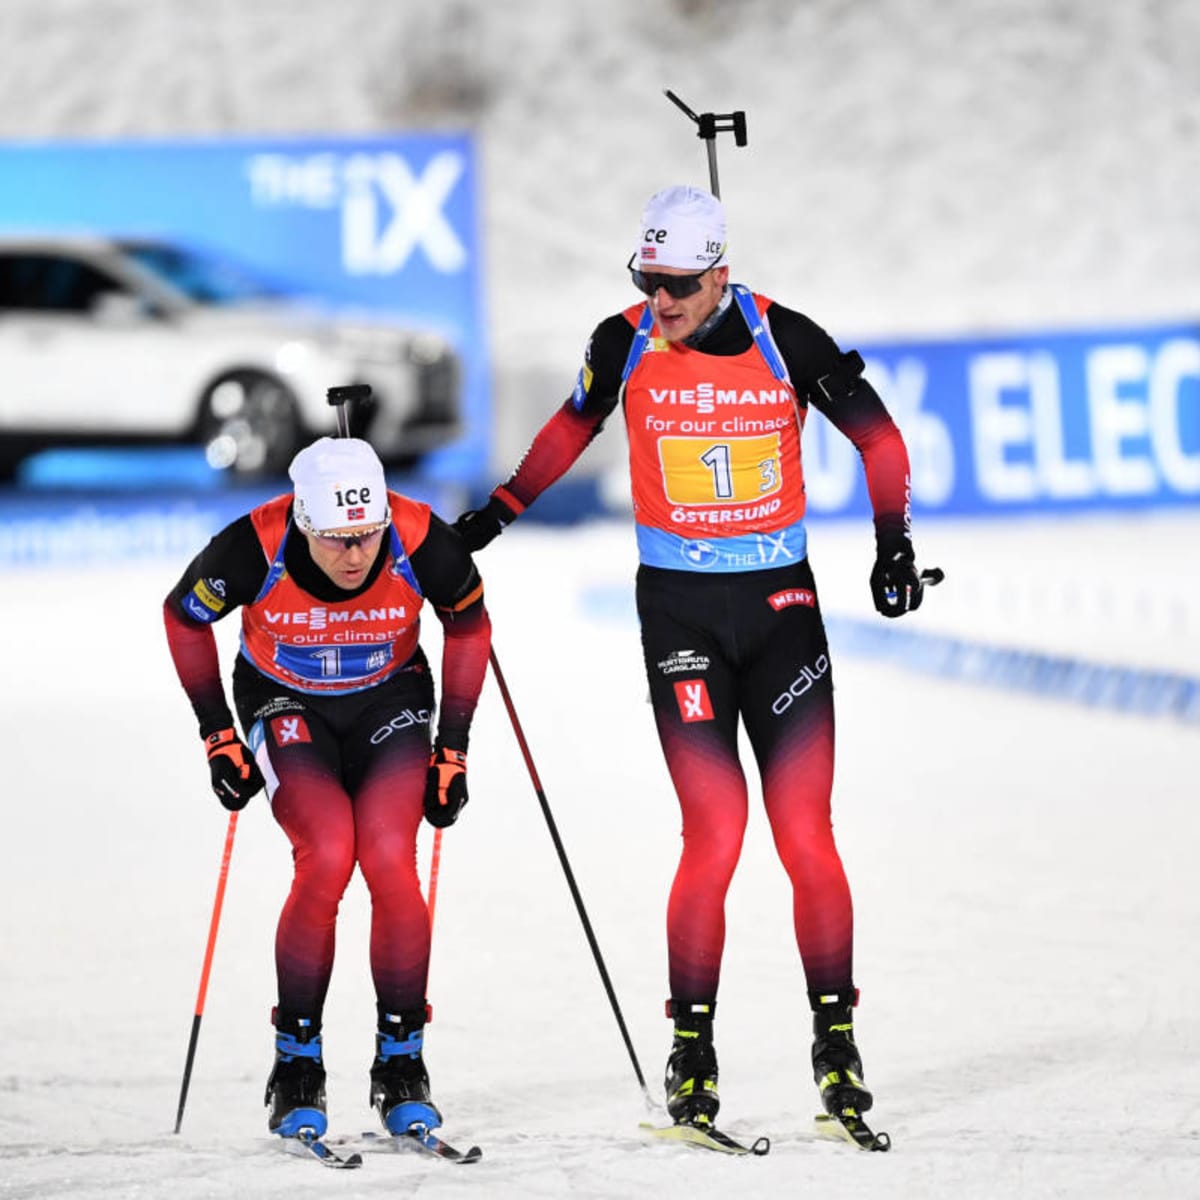 Olympic Biathlon Mens Individual 20km Live Stream Watch Online, TV Channel, Start Time - How to Watch and Stream Major League and College Sports 